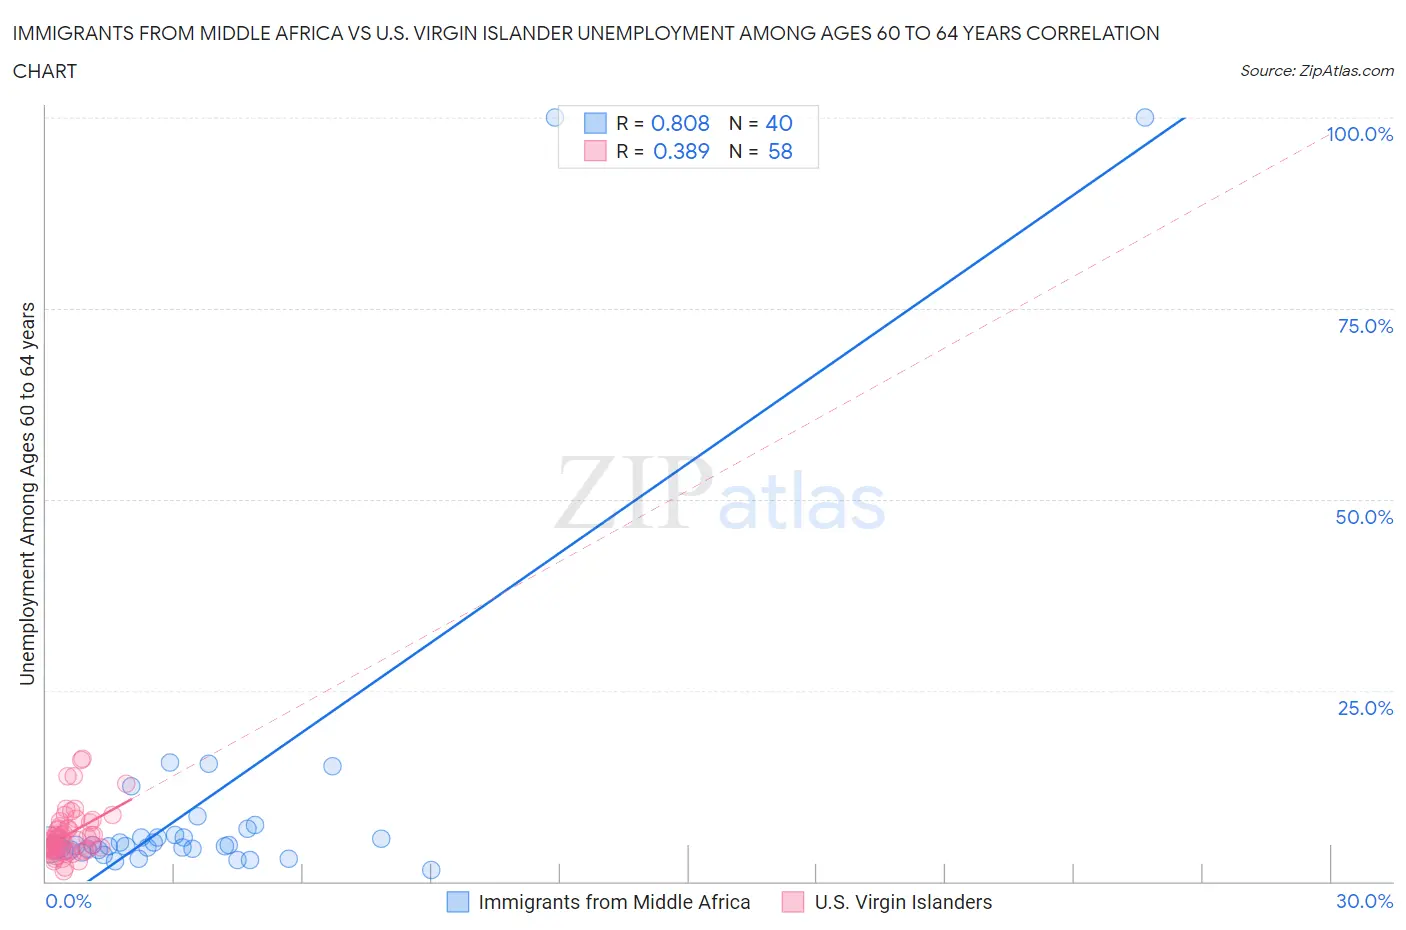 Immigrants from Middle Africa vs U.S. Virgin Islander Unemployment Among Ages 60 to 64 years